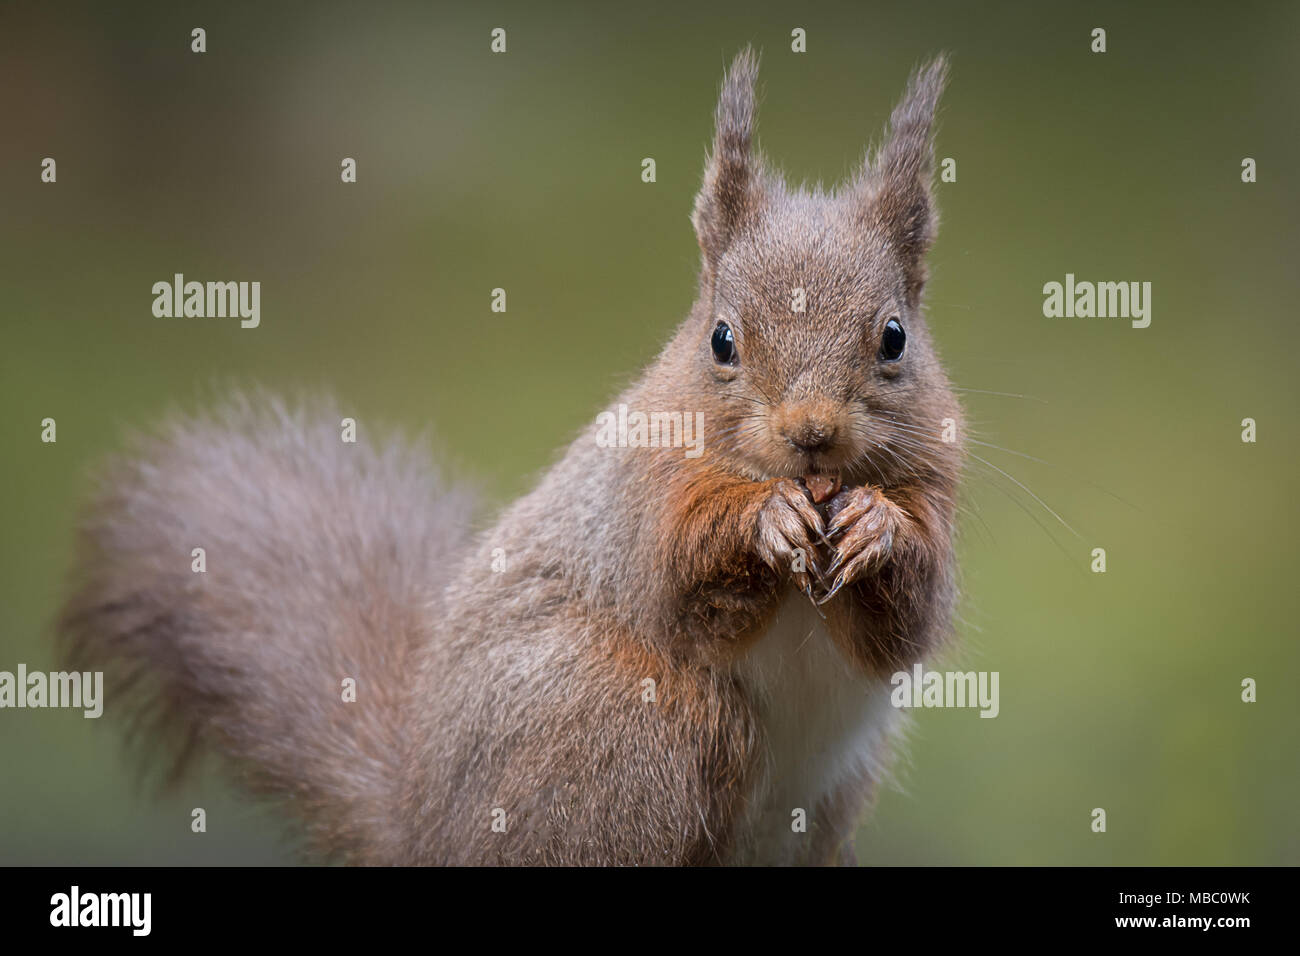 A close up portrait of a red squirrel sitting looking directly forward with paws to mouth eating and showing ear tufts of fur Stock Photo